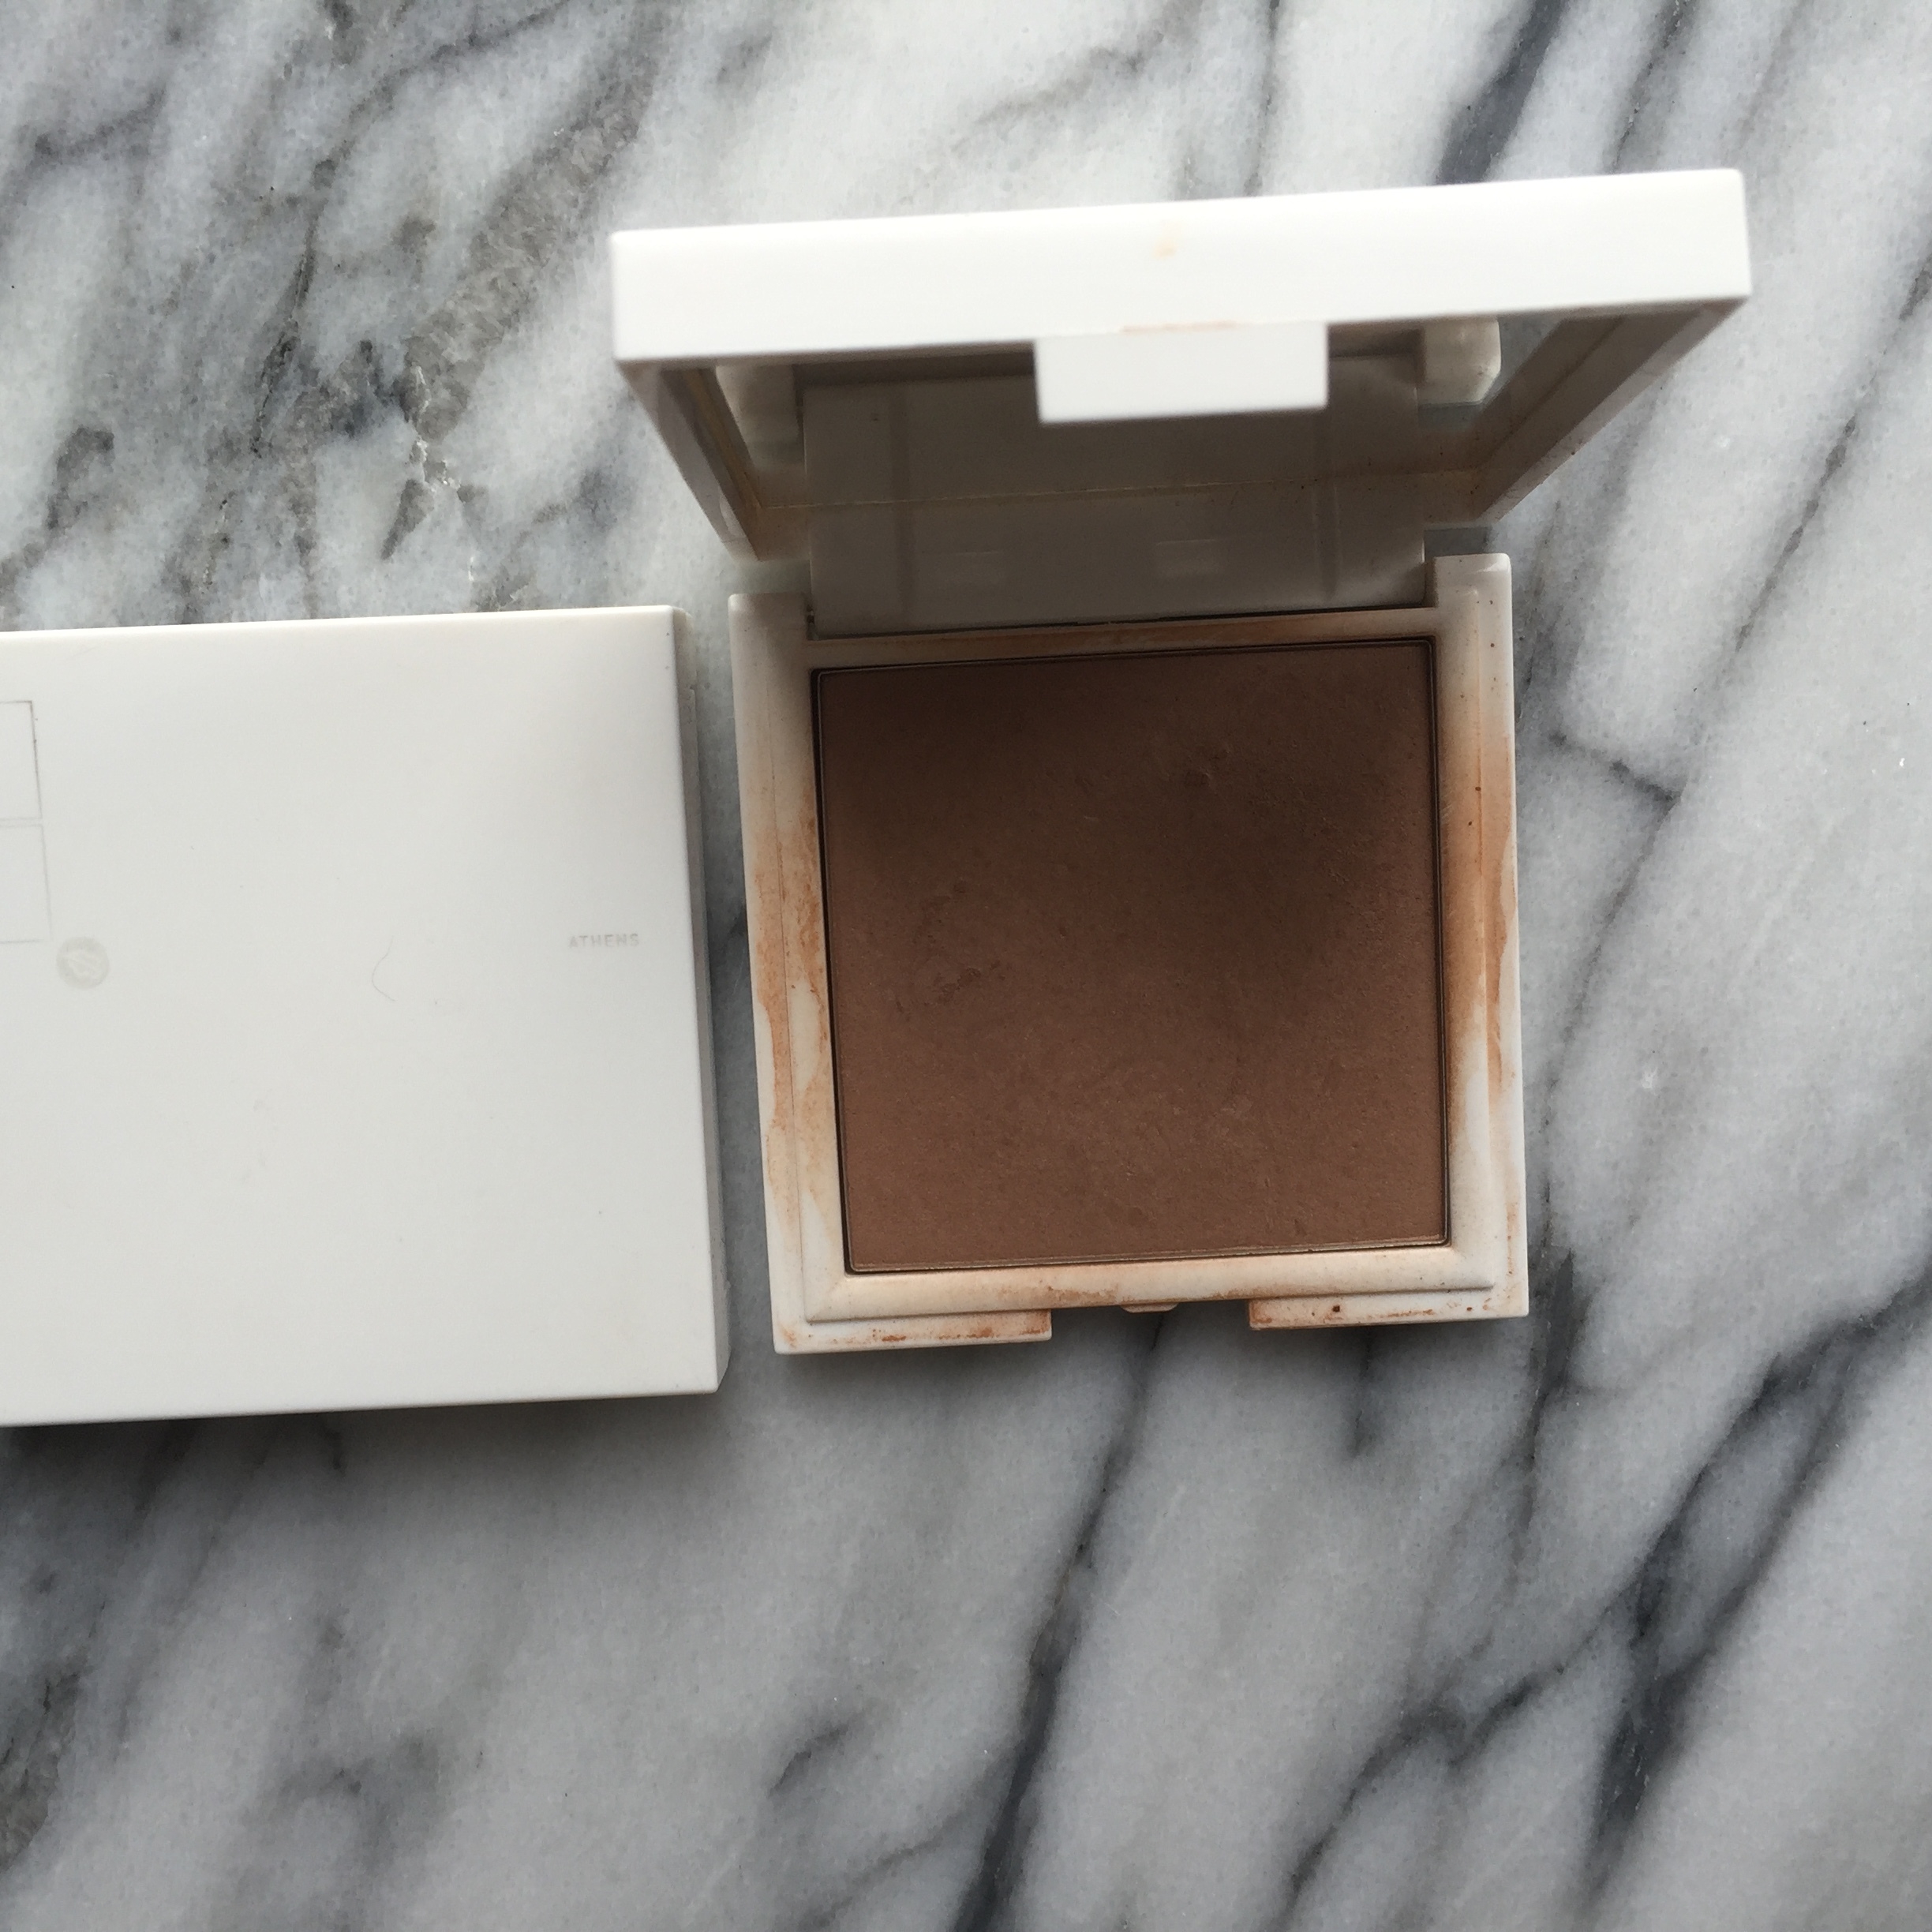 Korres Rice and Olive Oil Compact Powder